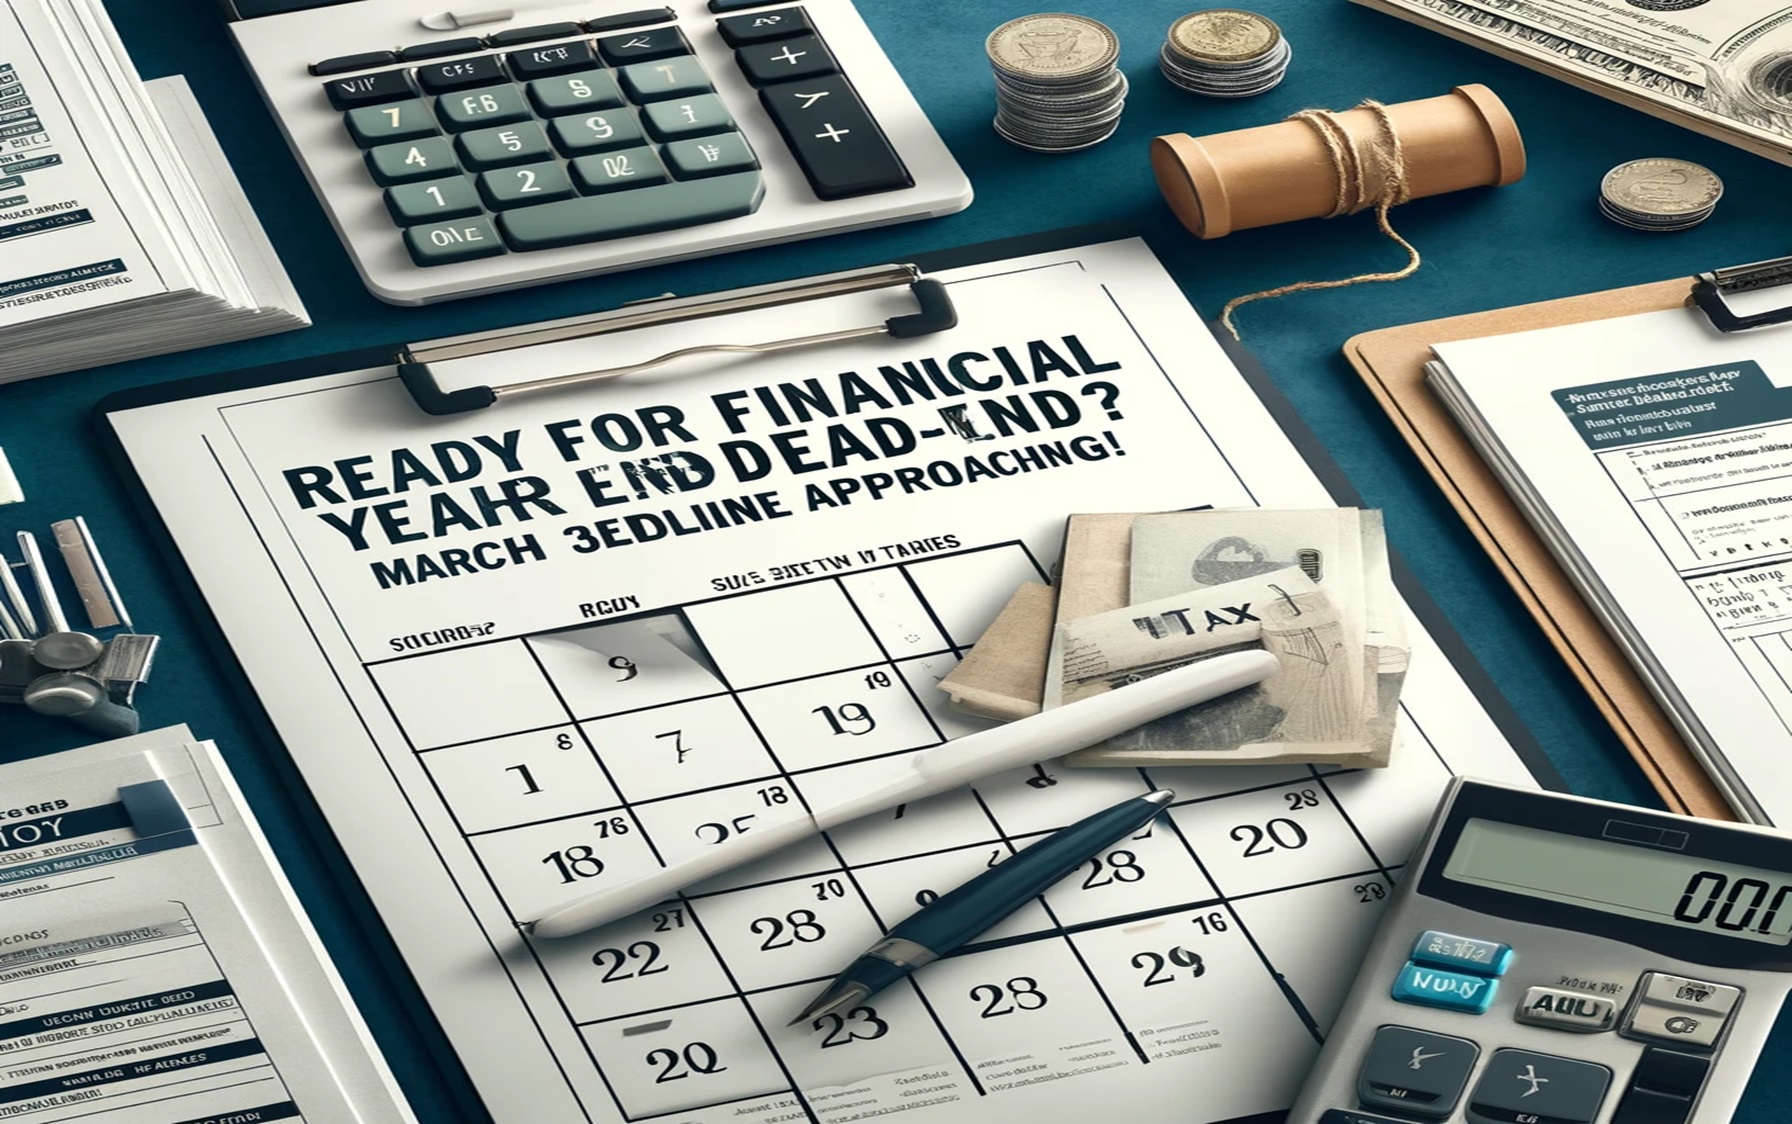 Checklist for financial year-end deadlines